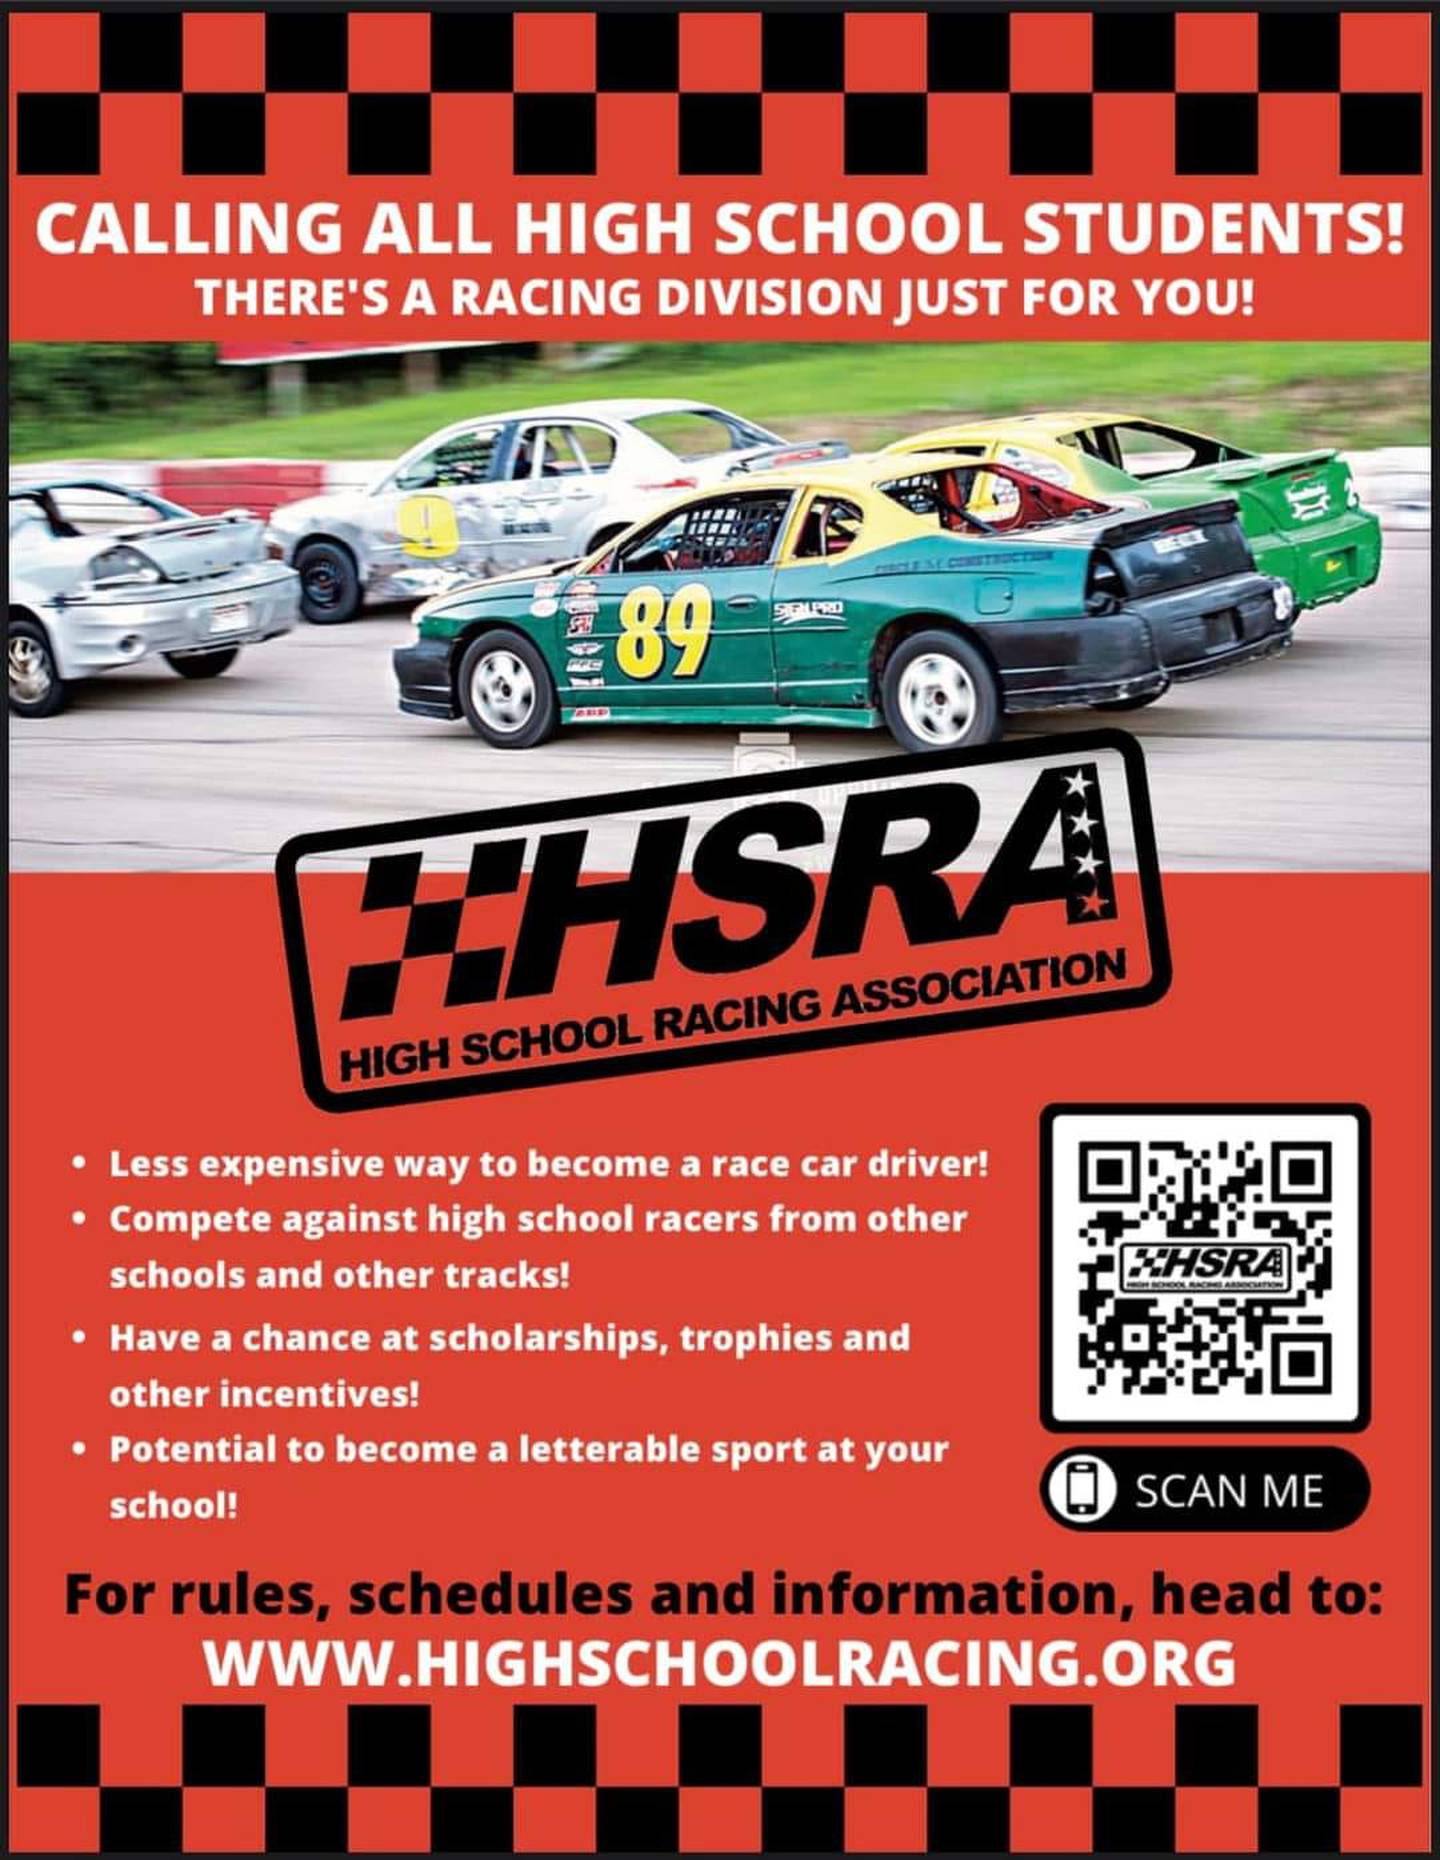 The flyer advertising the High School Racing Association.